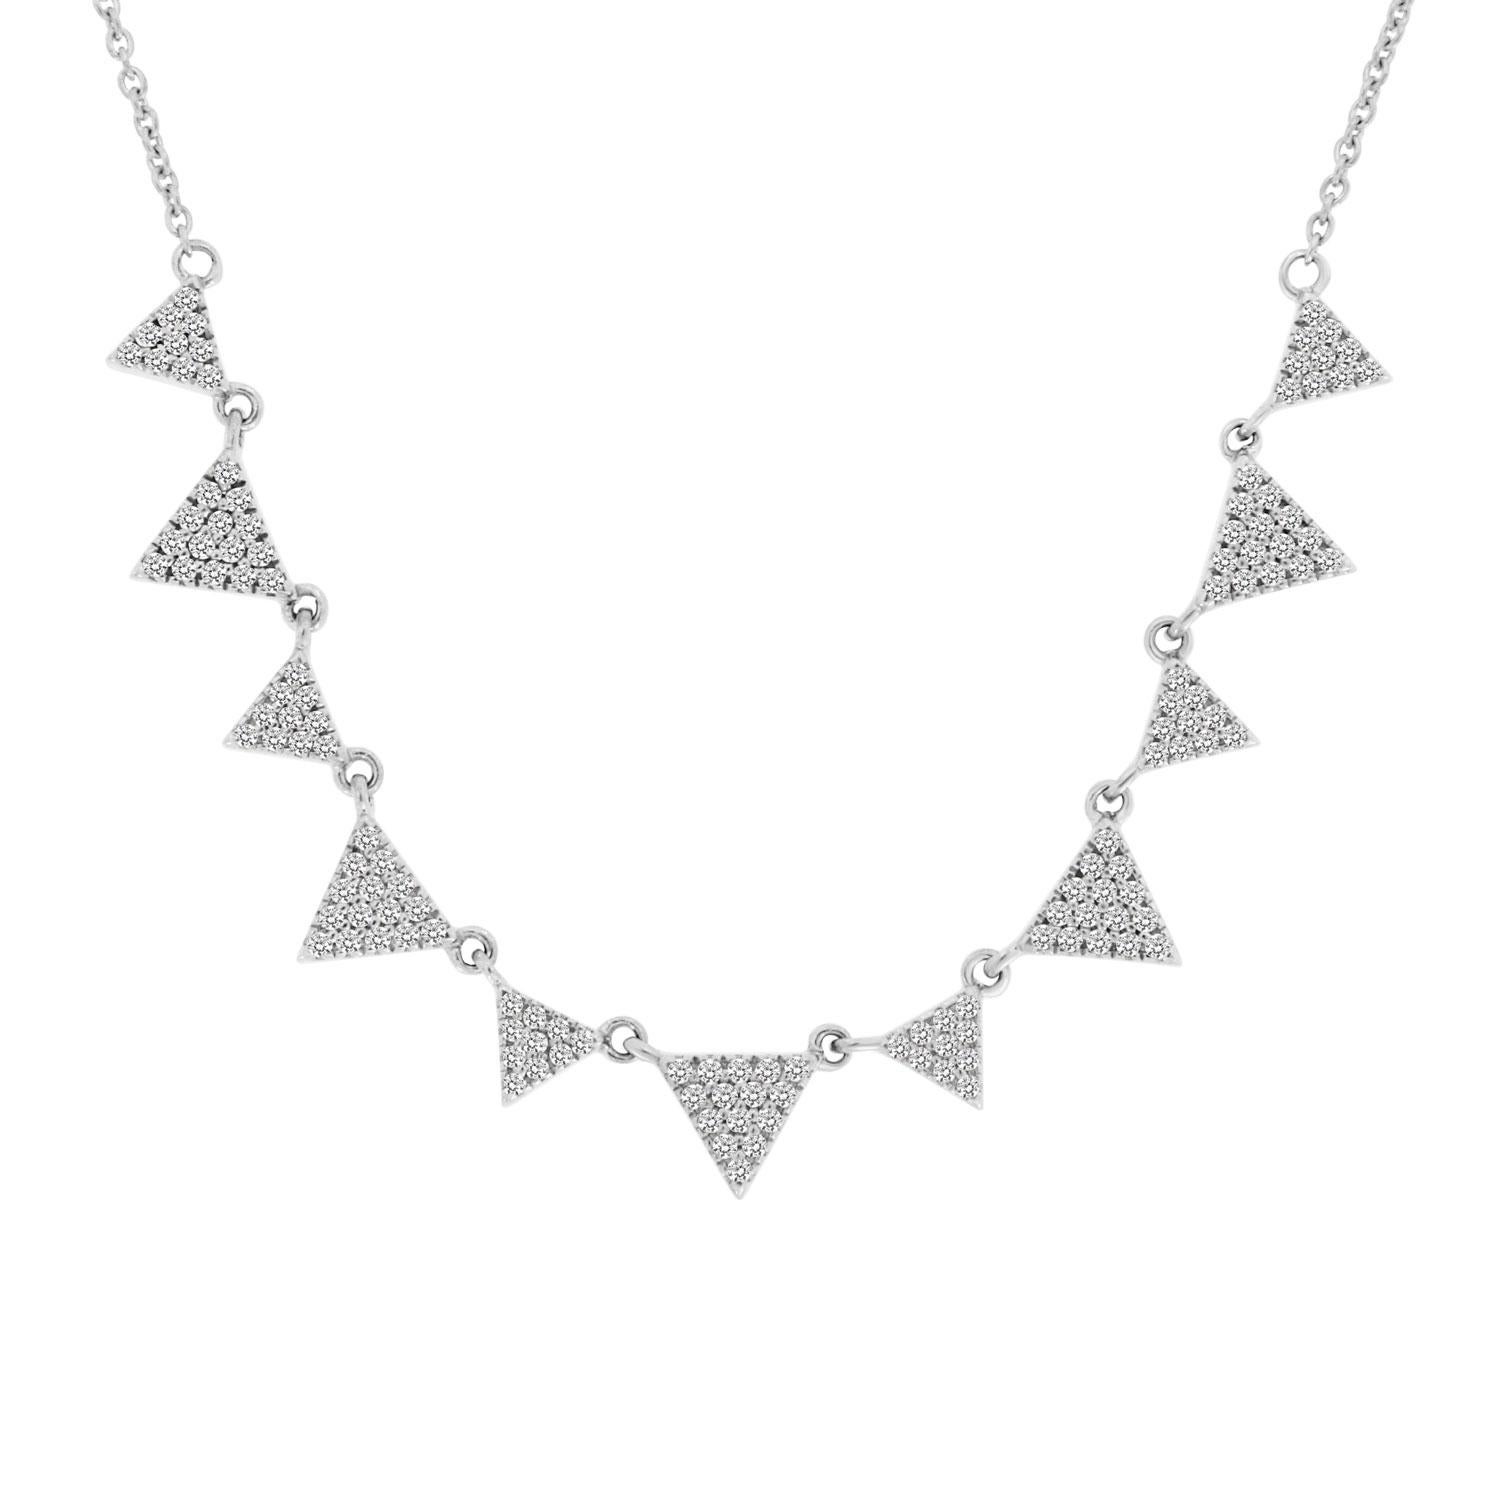 This elegant necklace features 135 brilliants diamond micro-prong set in 11 Triangle-shaped pendants alternating in sizes linked to each other via delicate loops. Experience The Difference in Person!

Product details: 

Center Gemstone Type: NATURAL